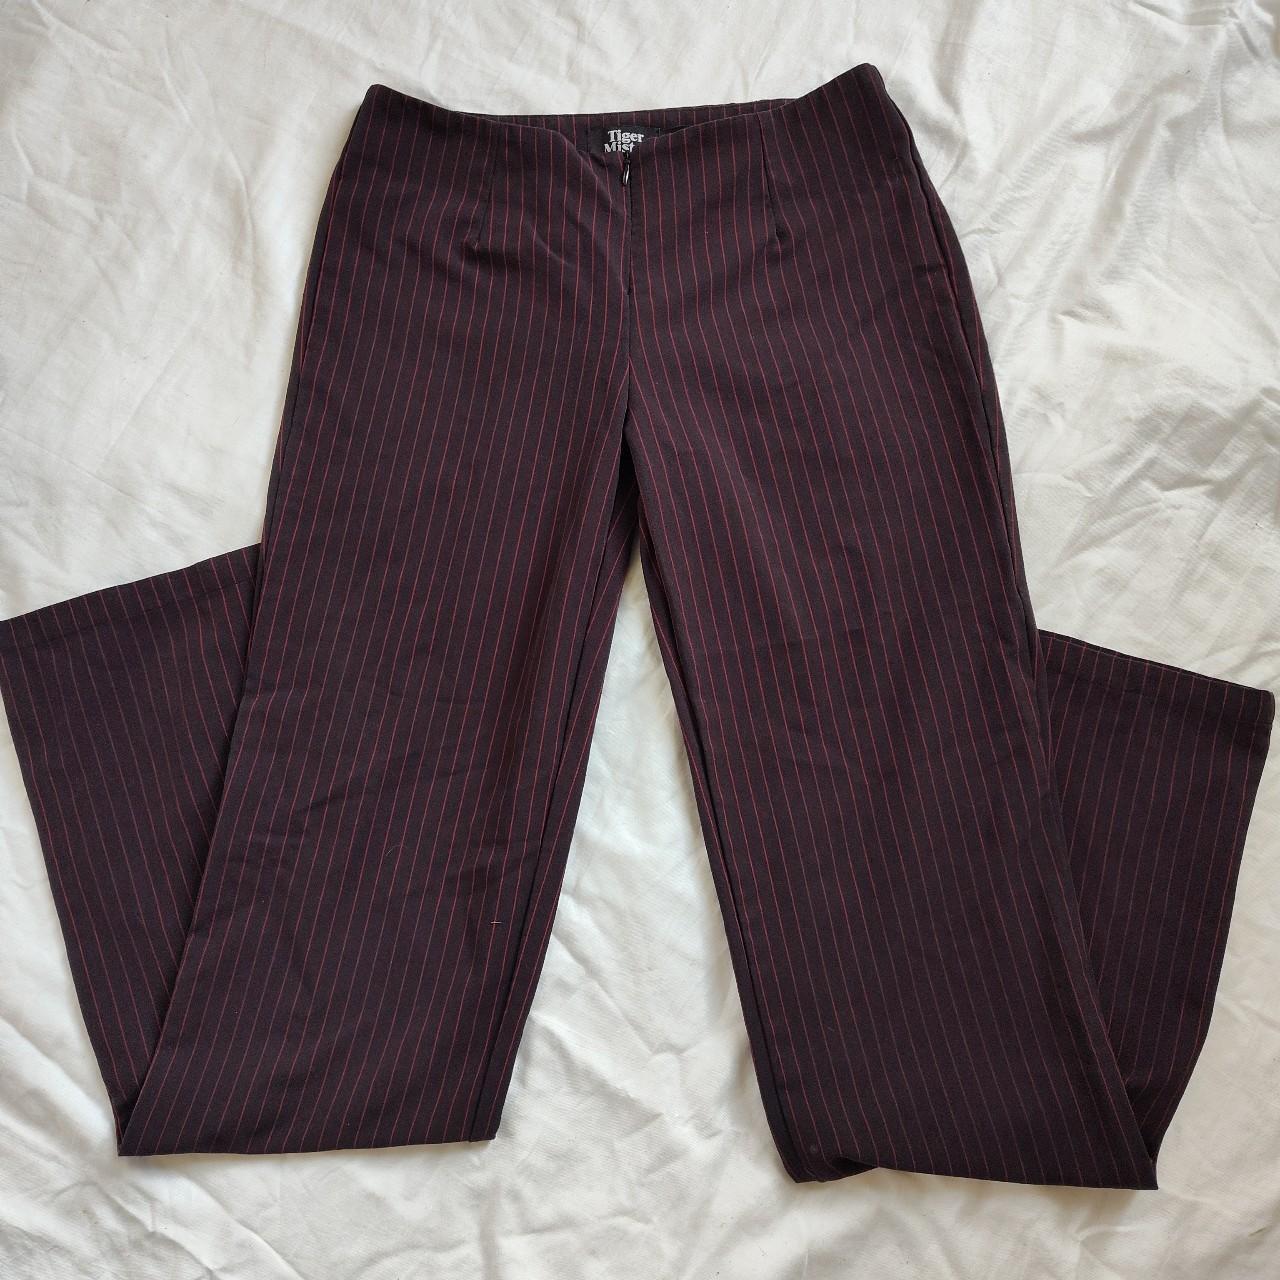 Early 2000s Gothic Pants Size : XSMALL Waist 30 in... - Depop